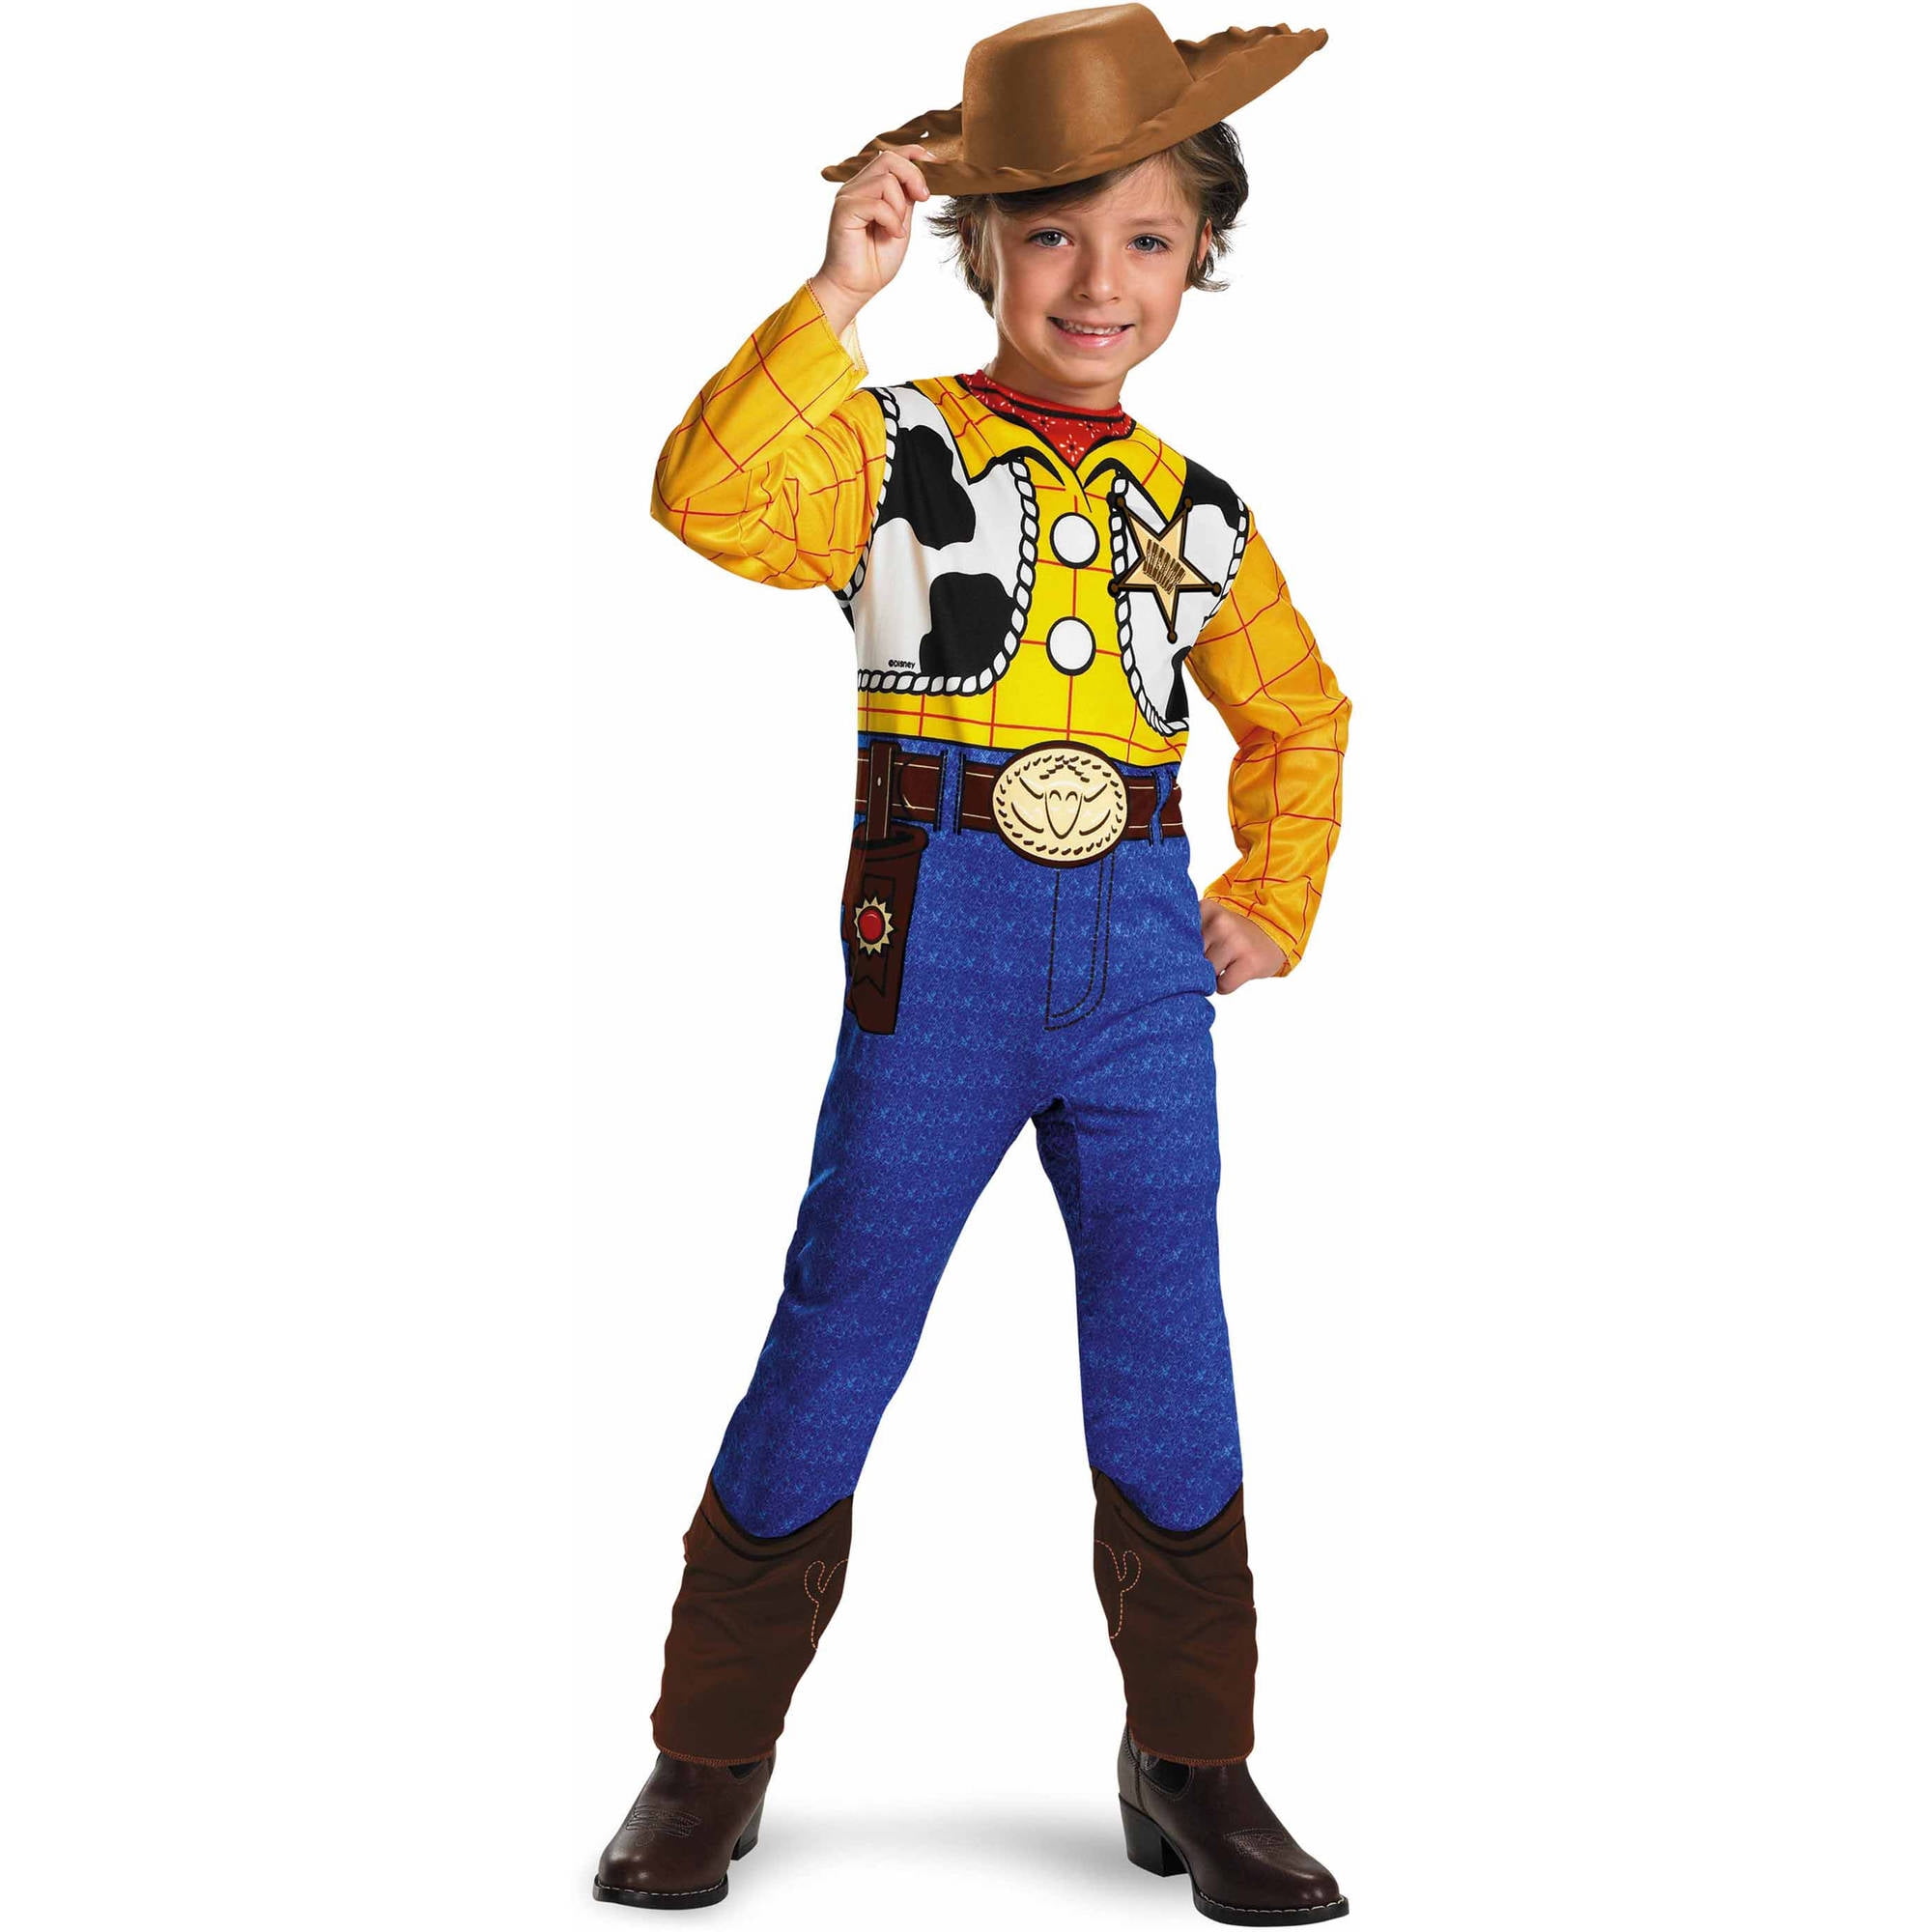 Toy Story Woody Classic Toddler Costume - Walmart.com